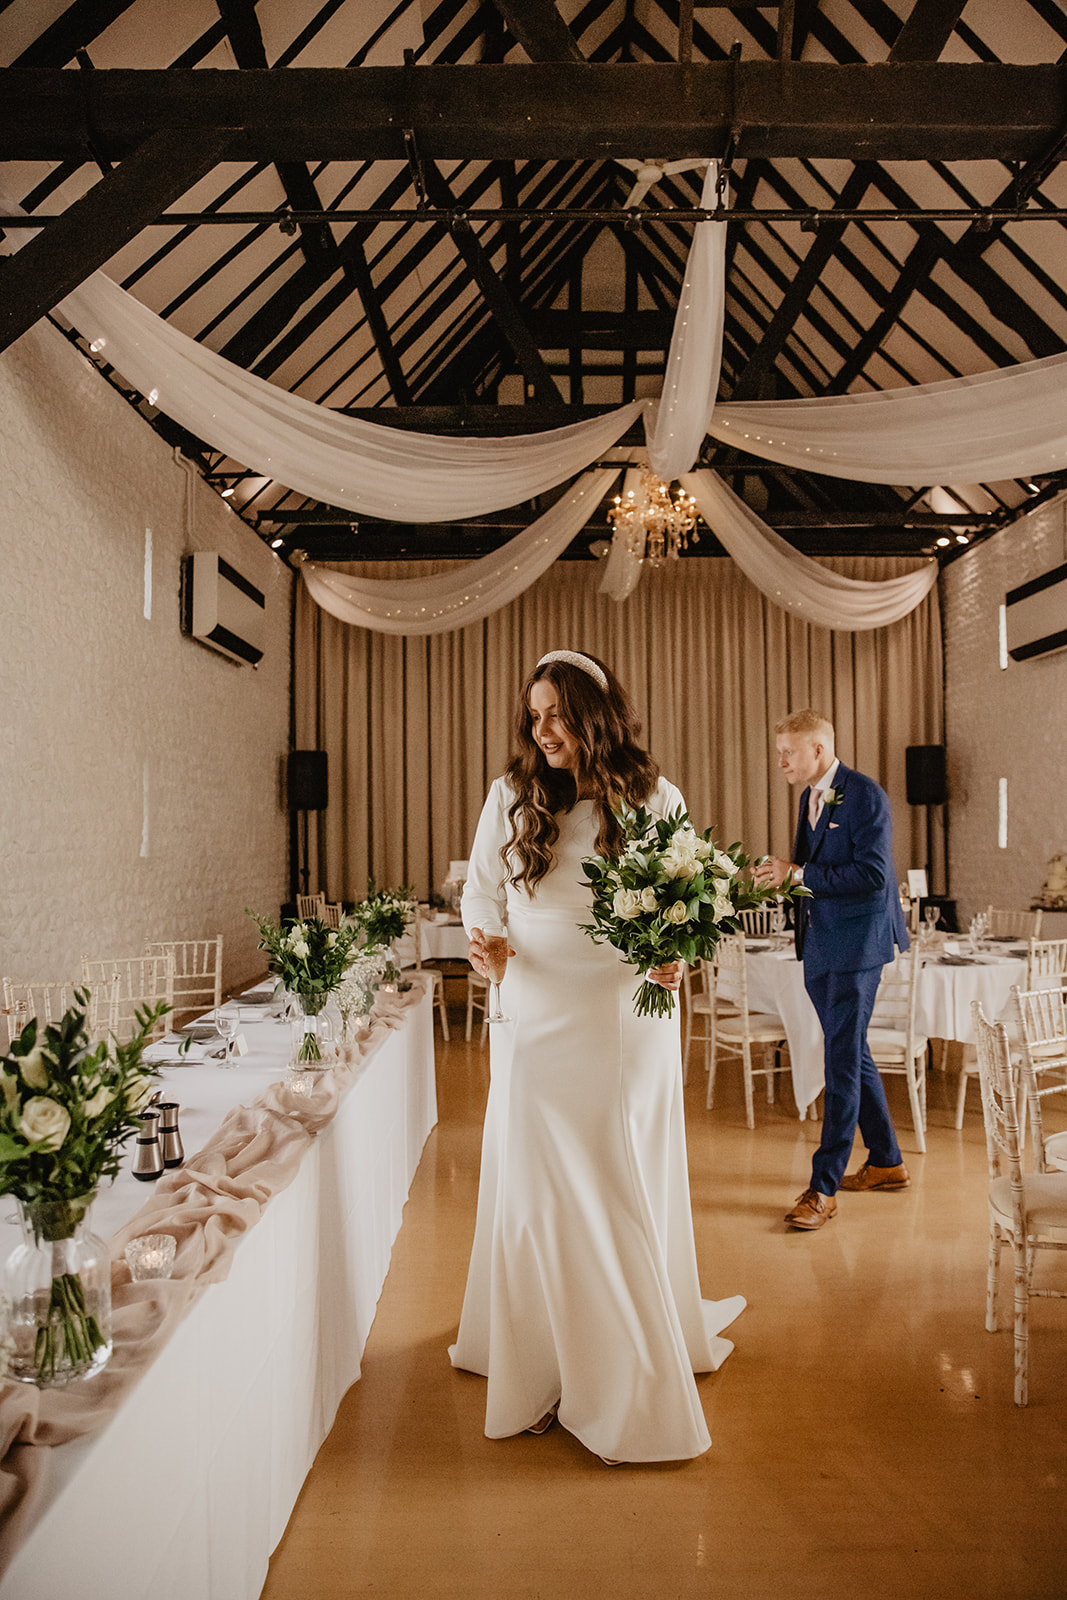 Bride at reception at a Field Place Manor House Wedding in Worthing, Sussex. By Olive Joy Photography